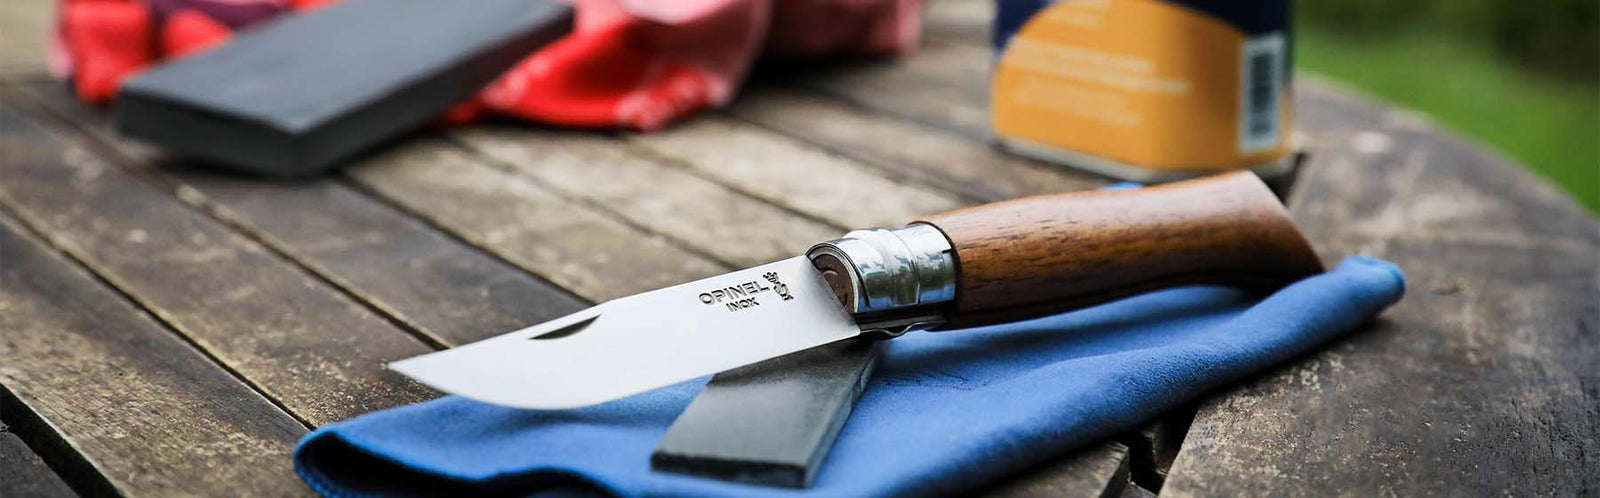 How to Buy Knives Wholesale: The Complete Guide